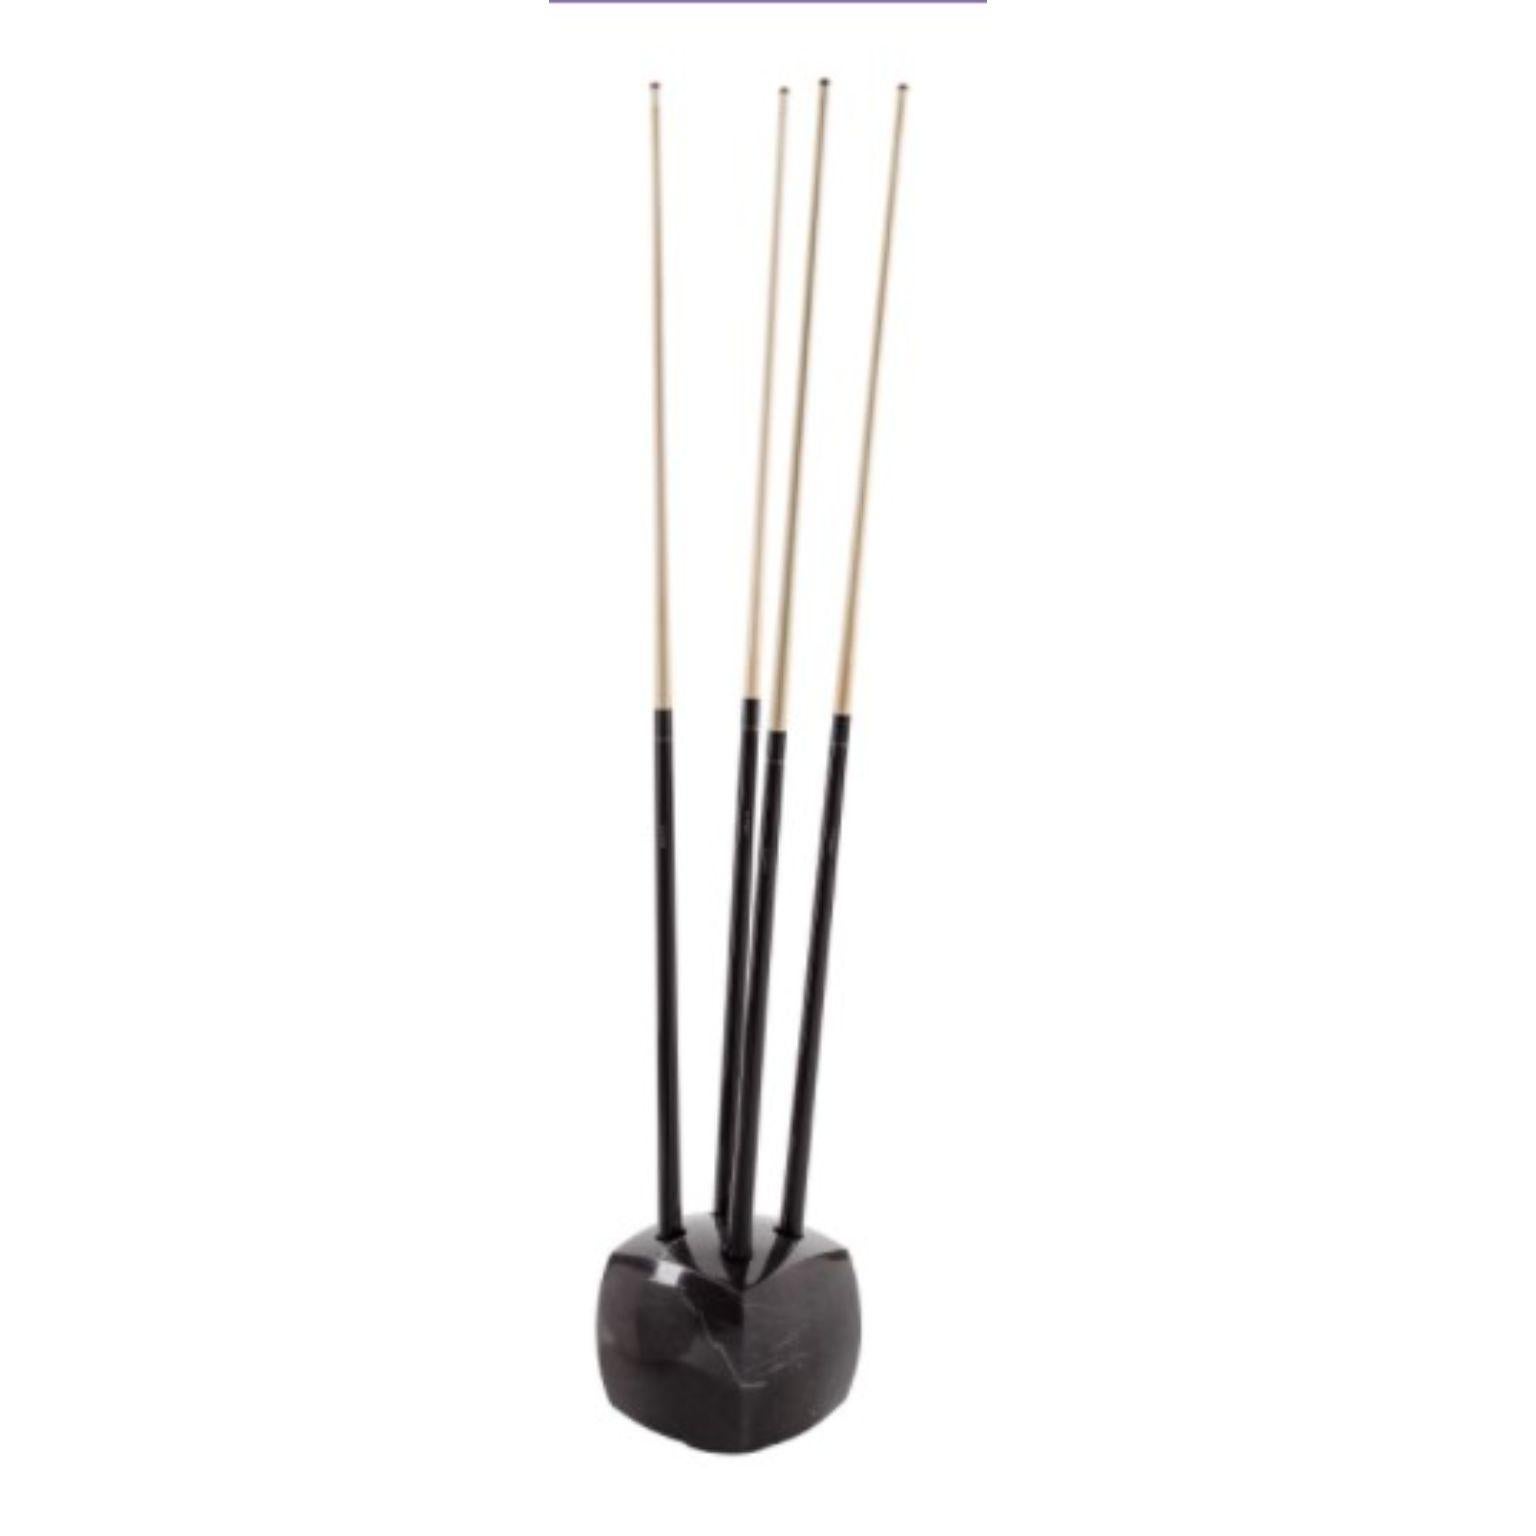 Set of 4 Longoni cue sticks + Tocco cue rack by Impatia
Dimensions: D40 x H145 cm and D28 x W28 x H28 cm
Material: Wood, Marble.

Impatia is an Italian design company located in the heart of the economic district of Northern Italy, in the Milan